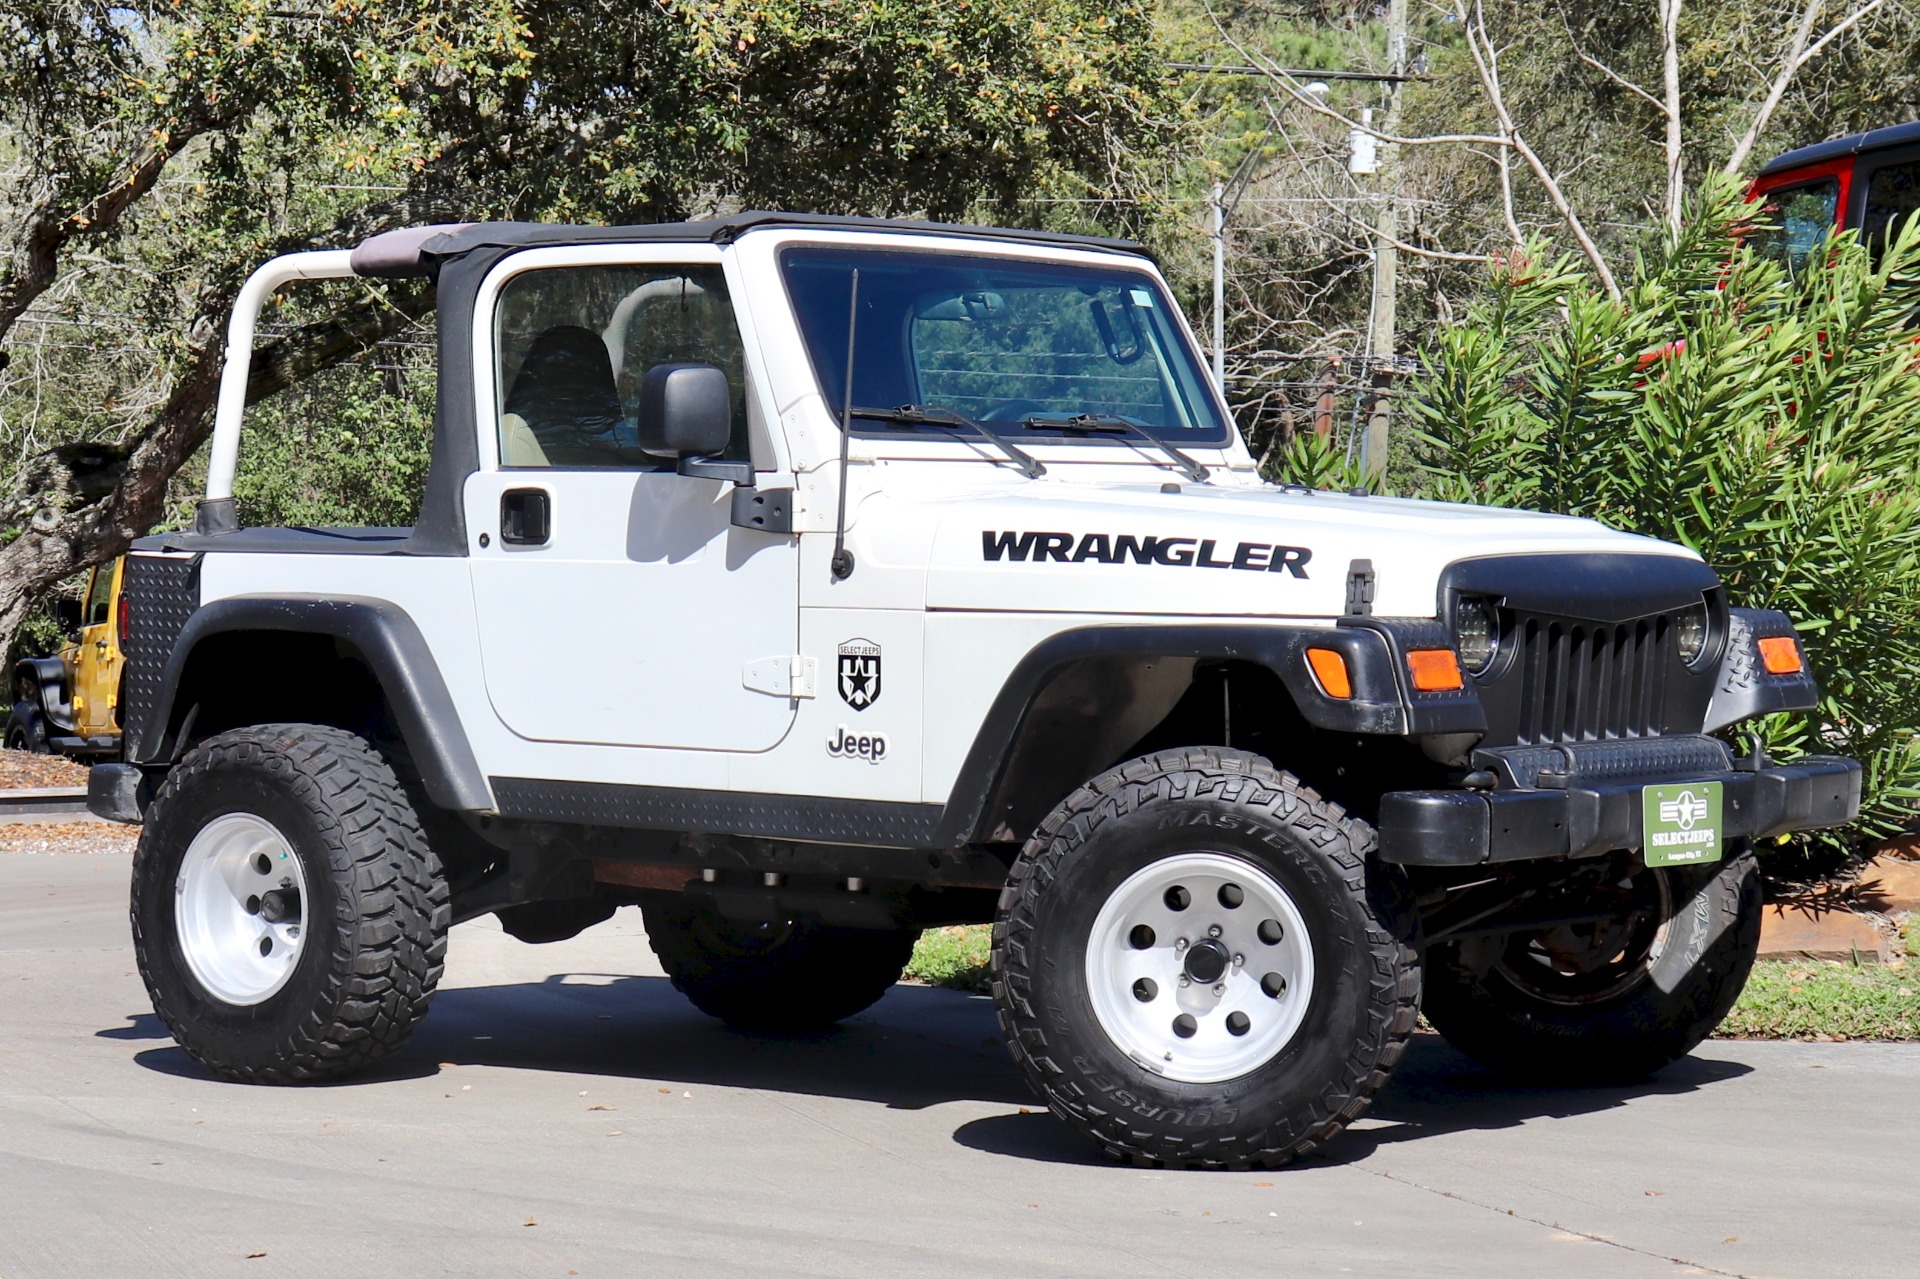 Used 2002 Jeep Wrangler 2dr Sport For Sale ($14,995) | Select Jeeps Inc.  Stock #757744